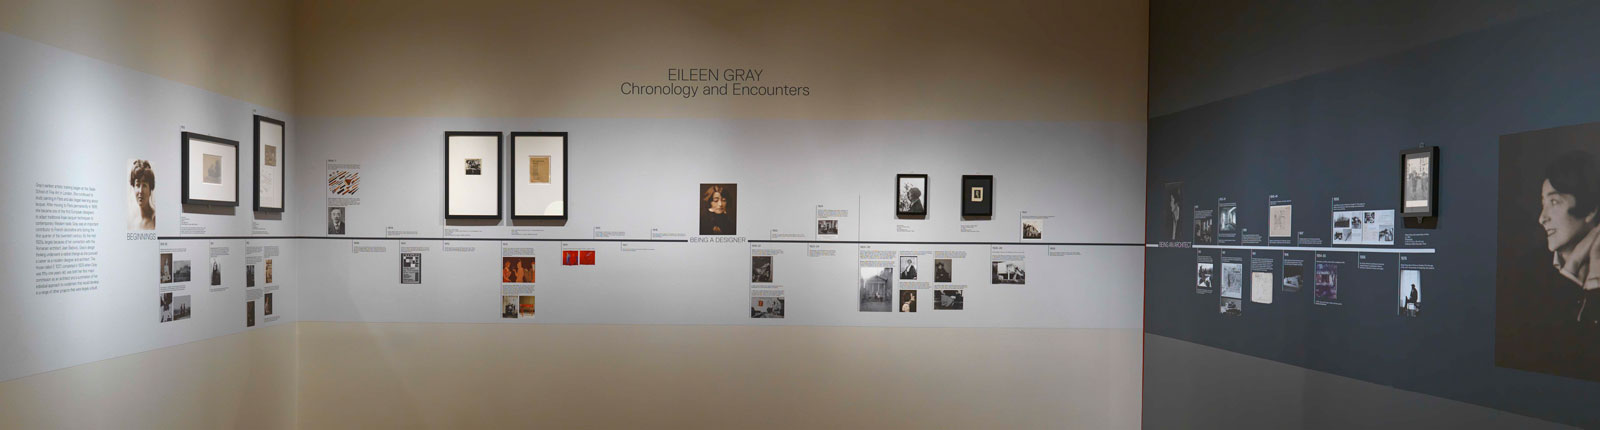 Installation image of a timeline of Gray's chronology and encounters.